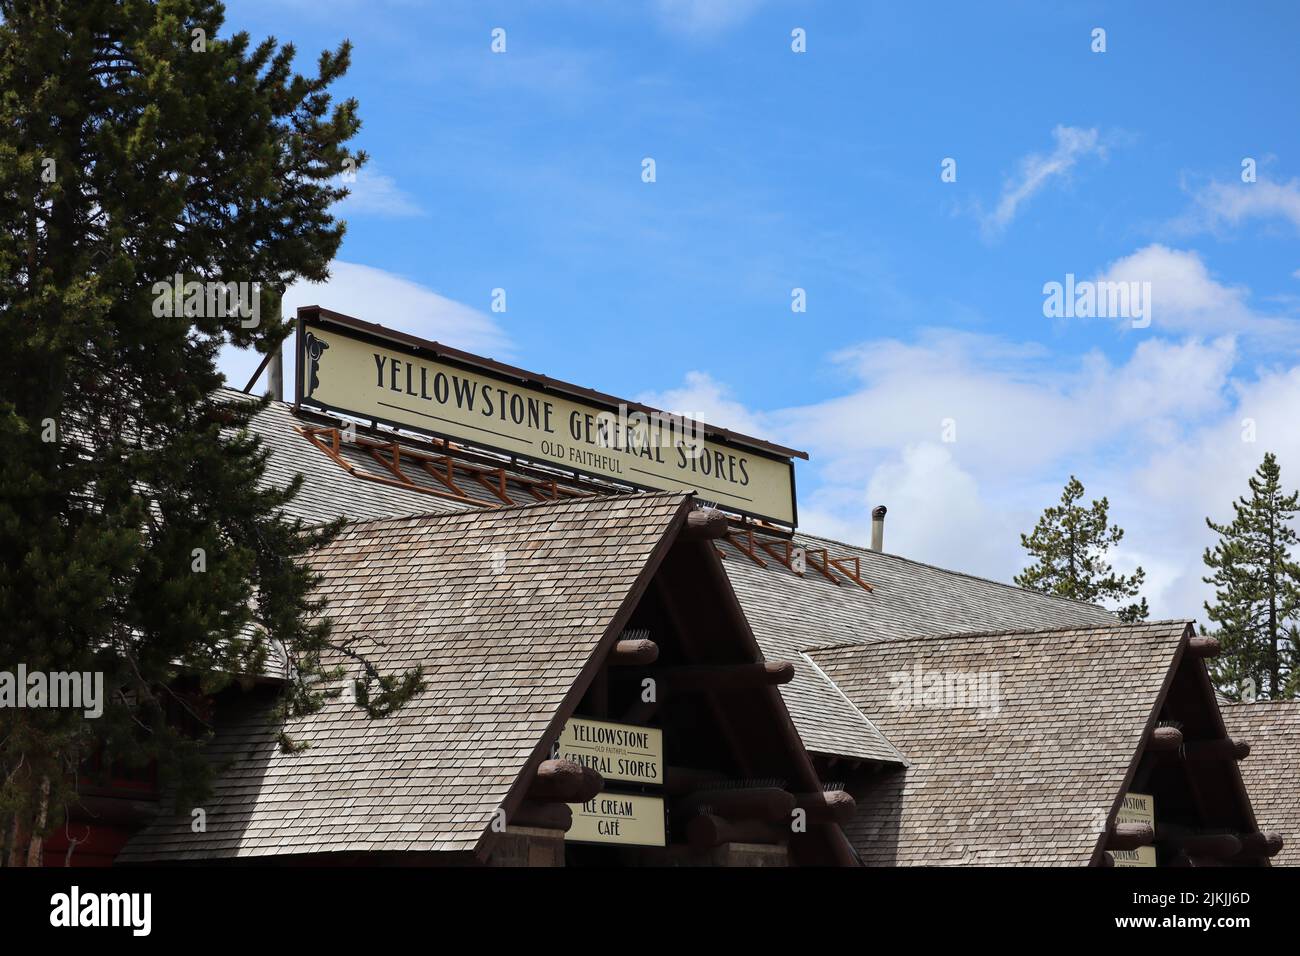 The inscription of Yellowstone National Park General Stores against the sky. Stock Photo